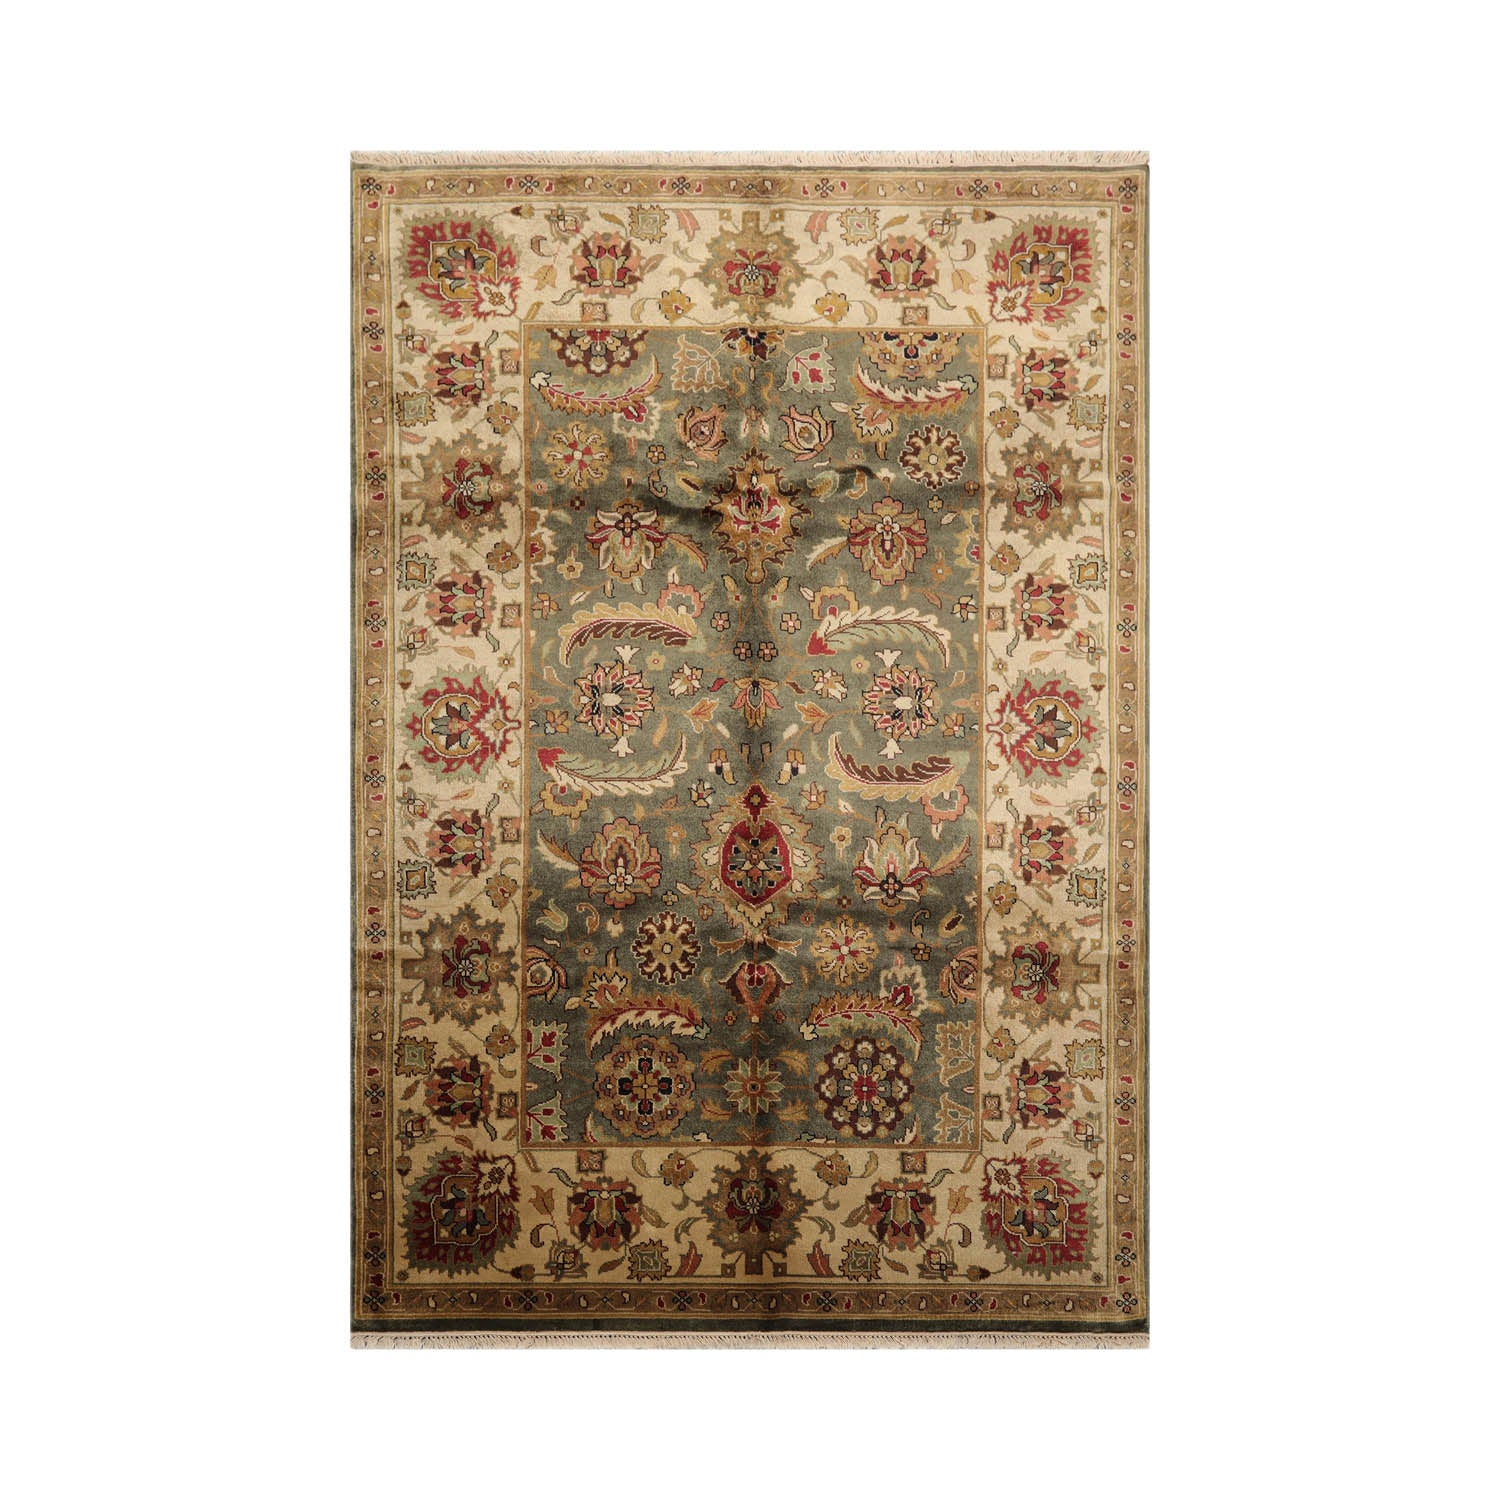 Feyzullah 6x9 Hand Knotted Oushak 100% Wool Kalaty Traditional Oriental Area Rug Green, Beige Color